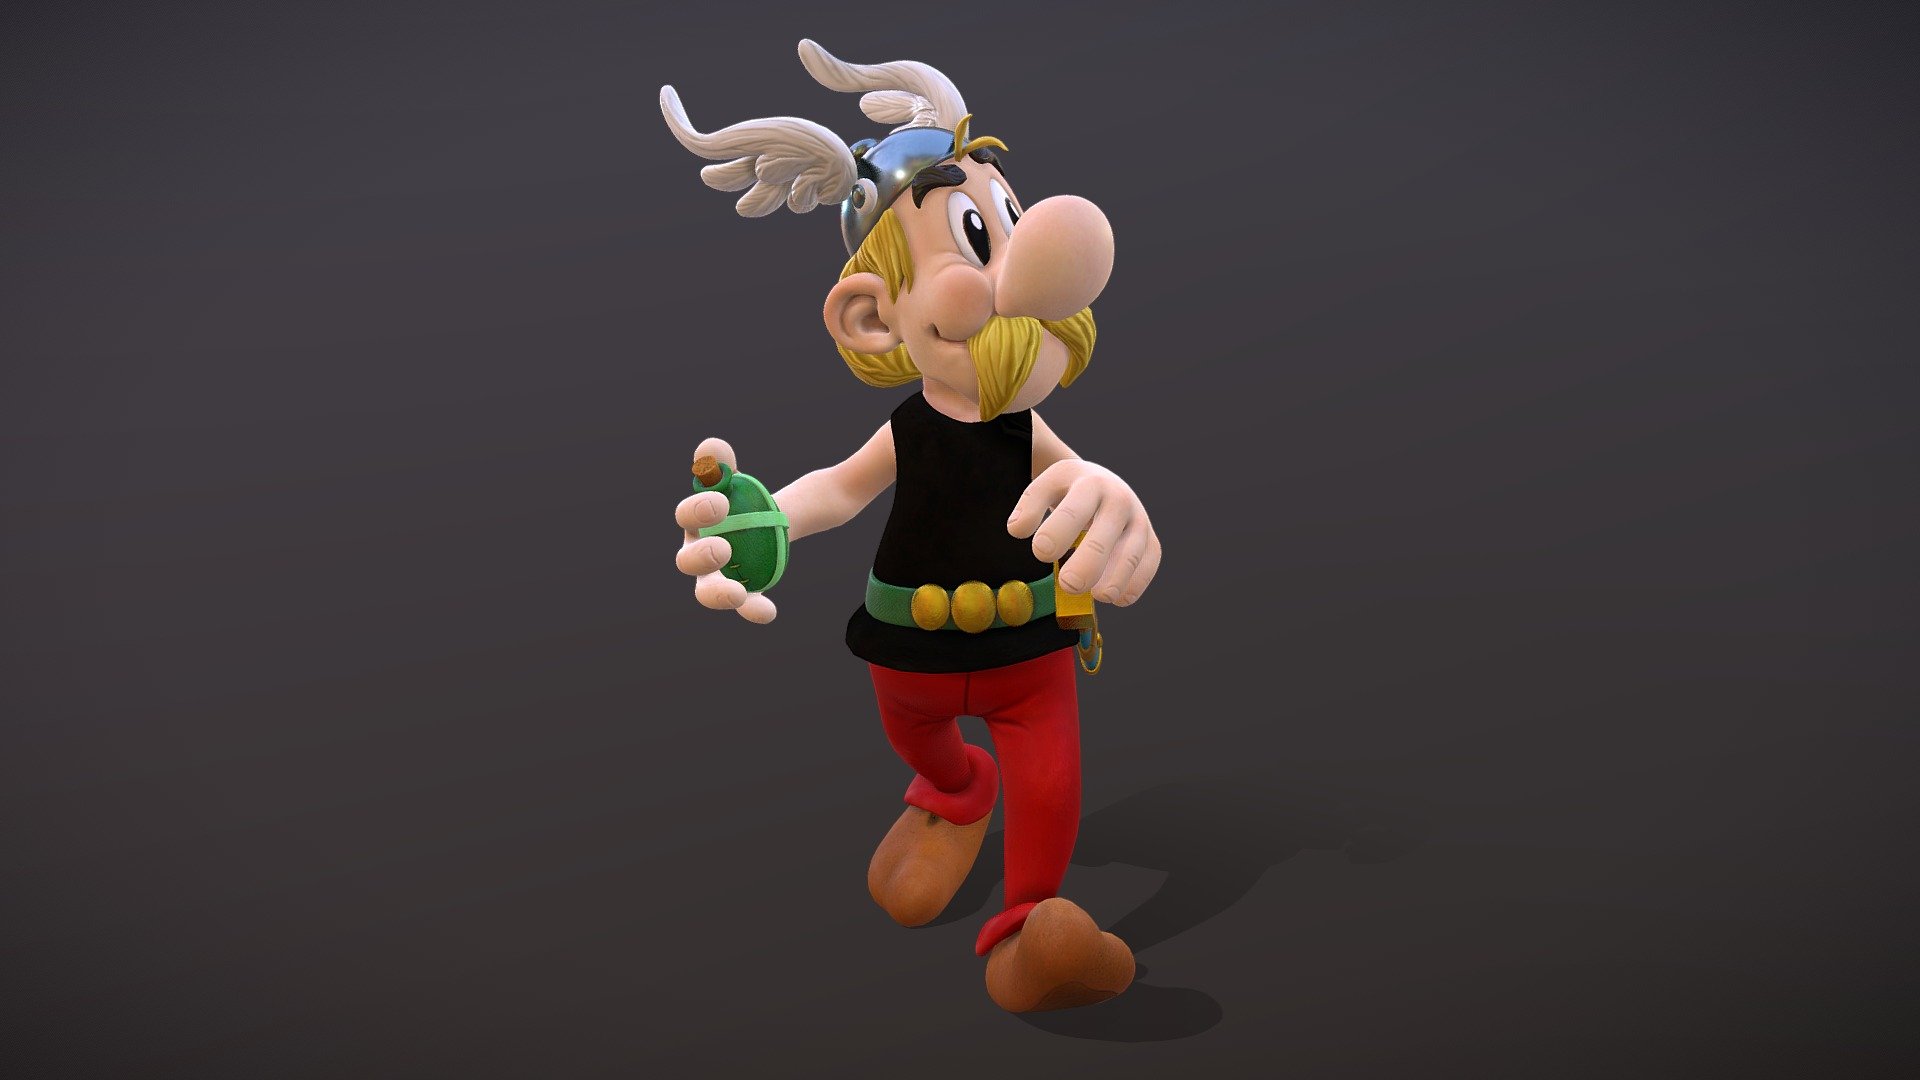 Zbrush practice to improve my skills. 

I decided to do one of my childhood heroes, Asterix. I love the aventures of this little Gaul! :)

Hope you like it! - Asterix the Gaul - 3D model by Elena Valero (@elenavalero) 3d model